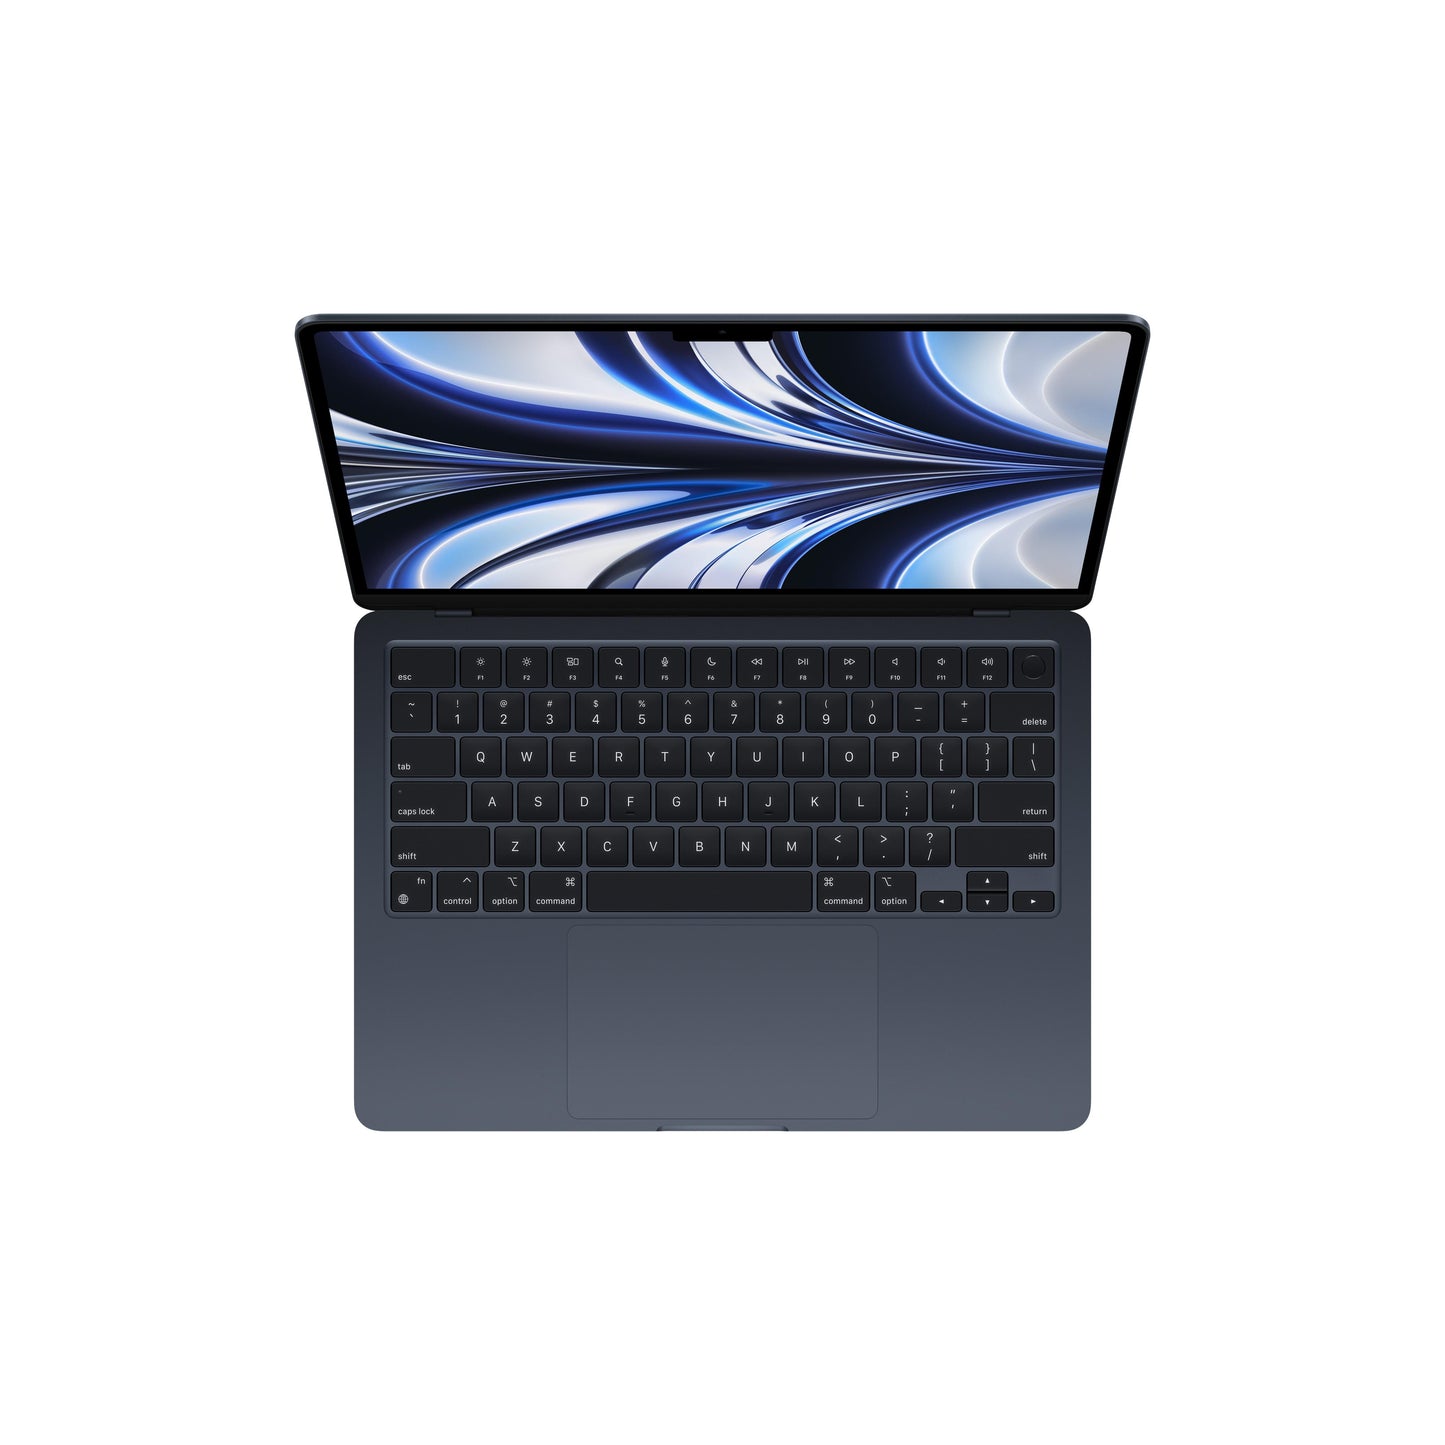 13-inch MacBook Air: Apple M2 chip with 8-core CPU and 10-core GPU, 512GB SSD - Midnight